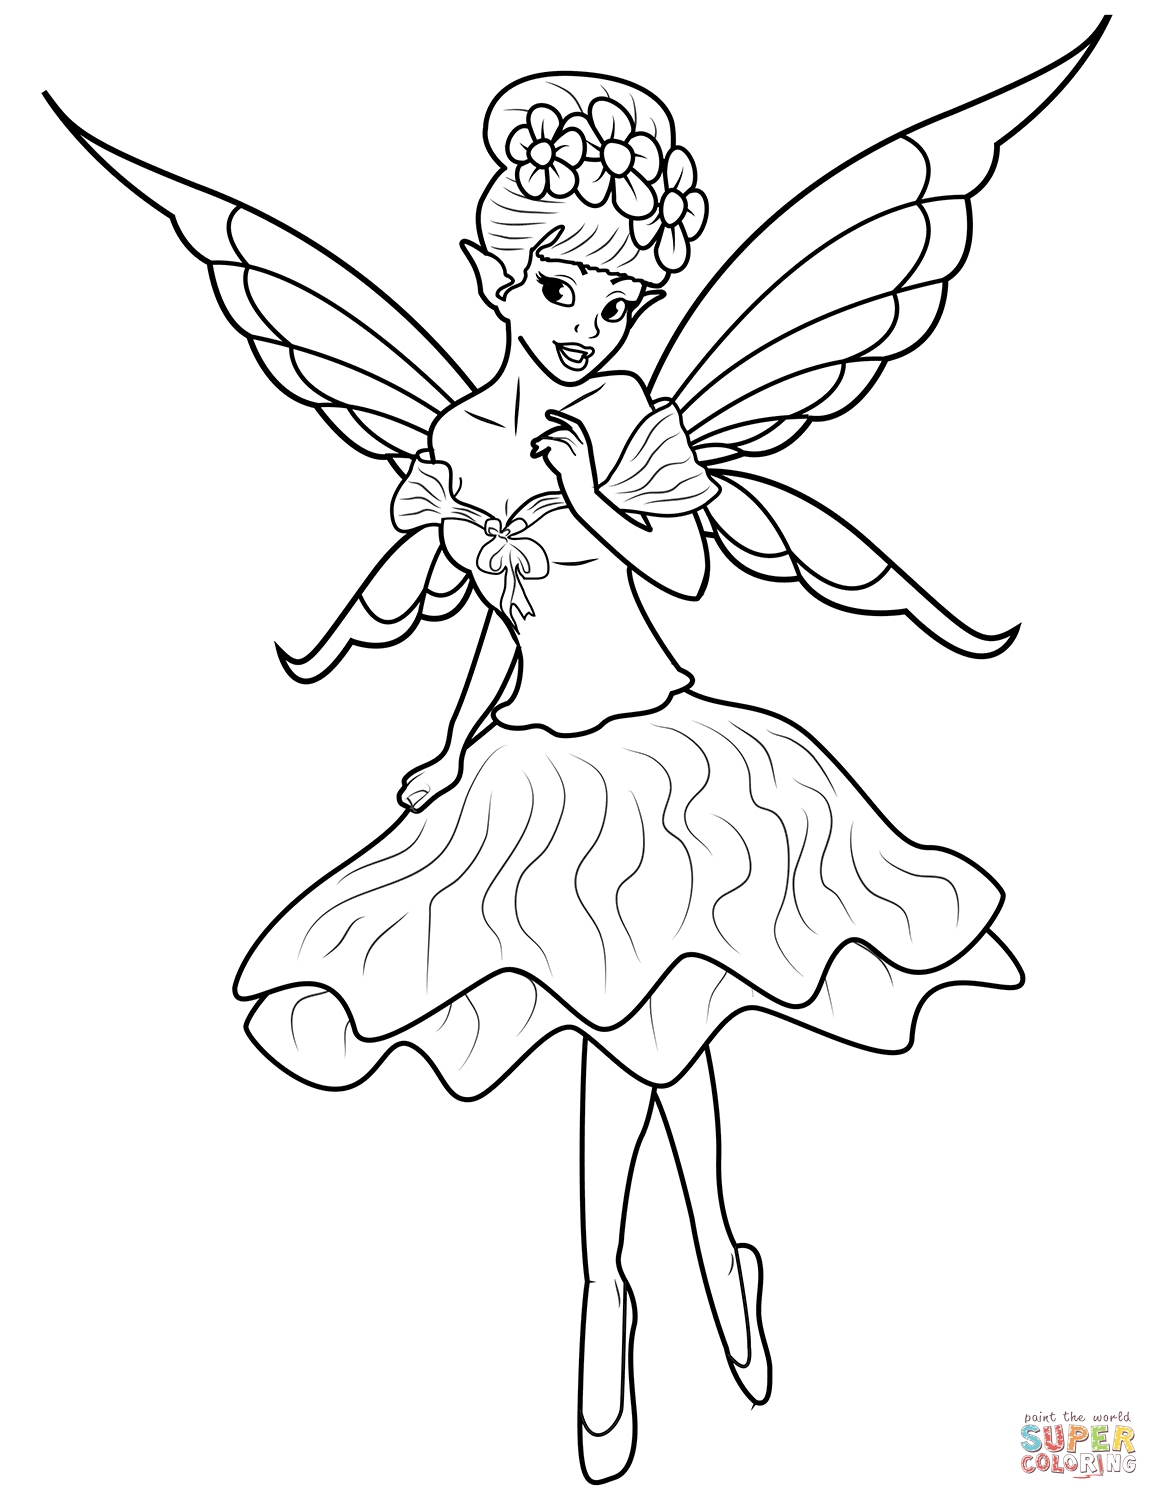 Fairy coloring page free printable coloring pages